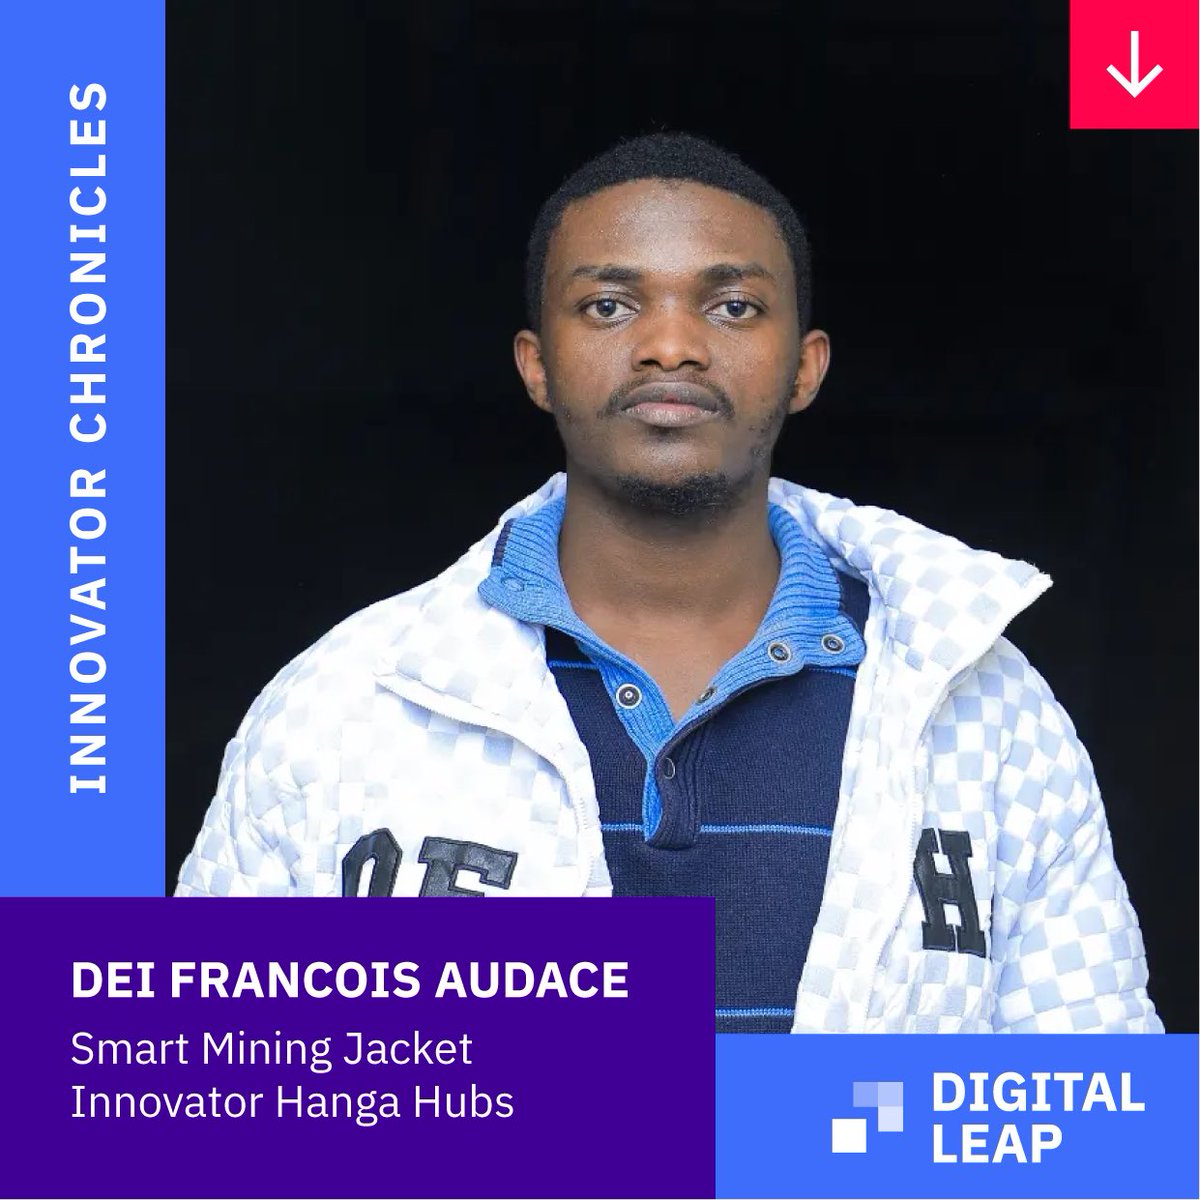 Dei Francois Audace's Smart Mining Jacket focuses on developing a system that enhances communication within mines, while also monitoring crucial metrics like air quality & temperature. Read more: bit.ly/3Vj2qfS #InnovateRwanda #DigitalLeapRwanda #InnovationChronicles